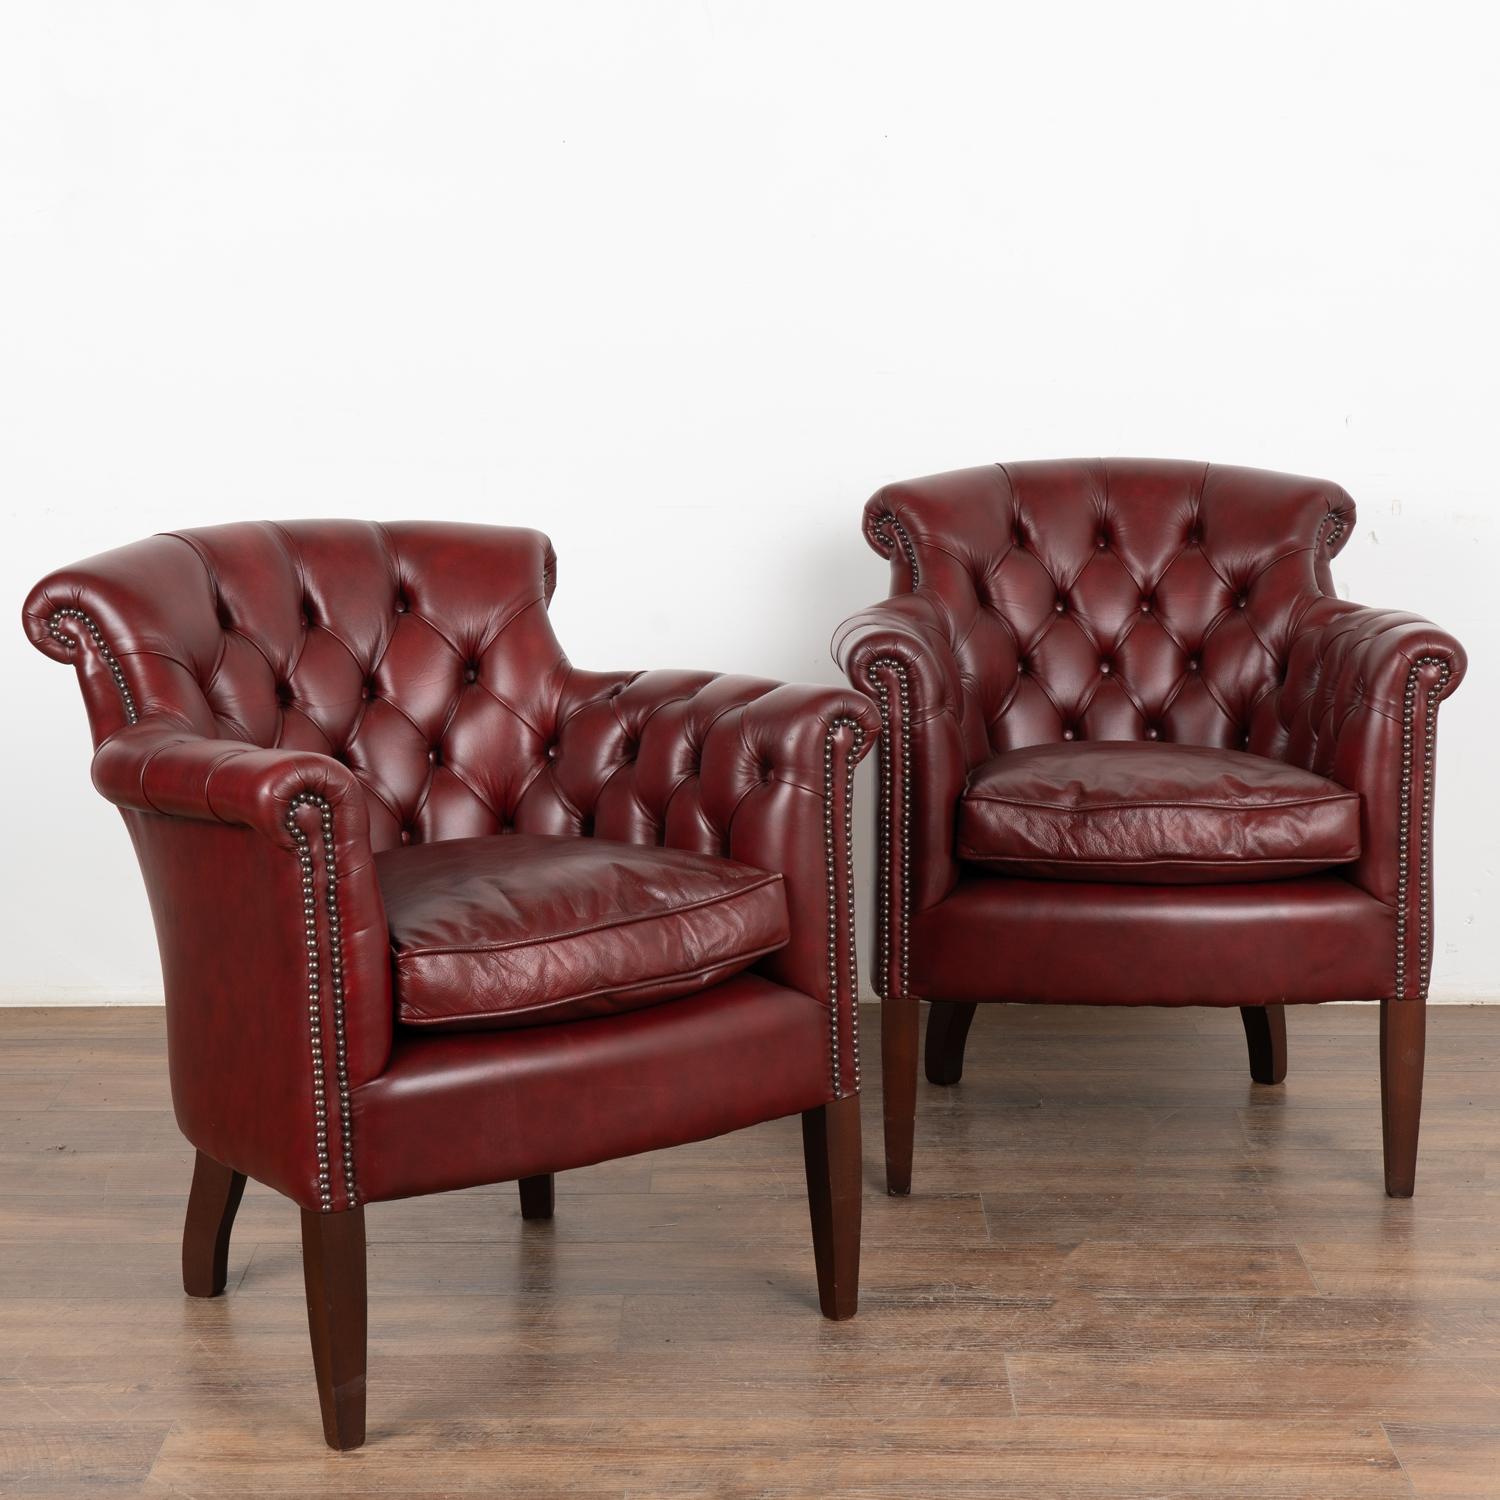 Handsome pair of red leather Chesterfield style arm chairs with tufted/buttoned back and narrow rolled arms with nailhead trim.
Vintage leather reflects years of use including scuffs, scratches, impressions, crackling, etc. Buttons in place.
Sold in